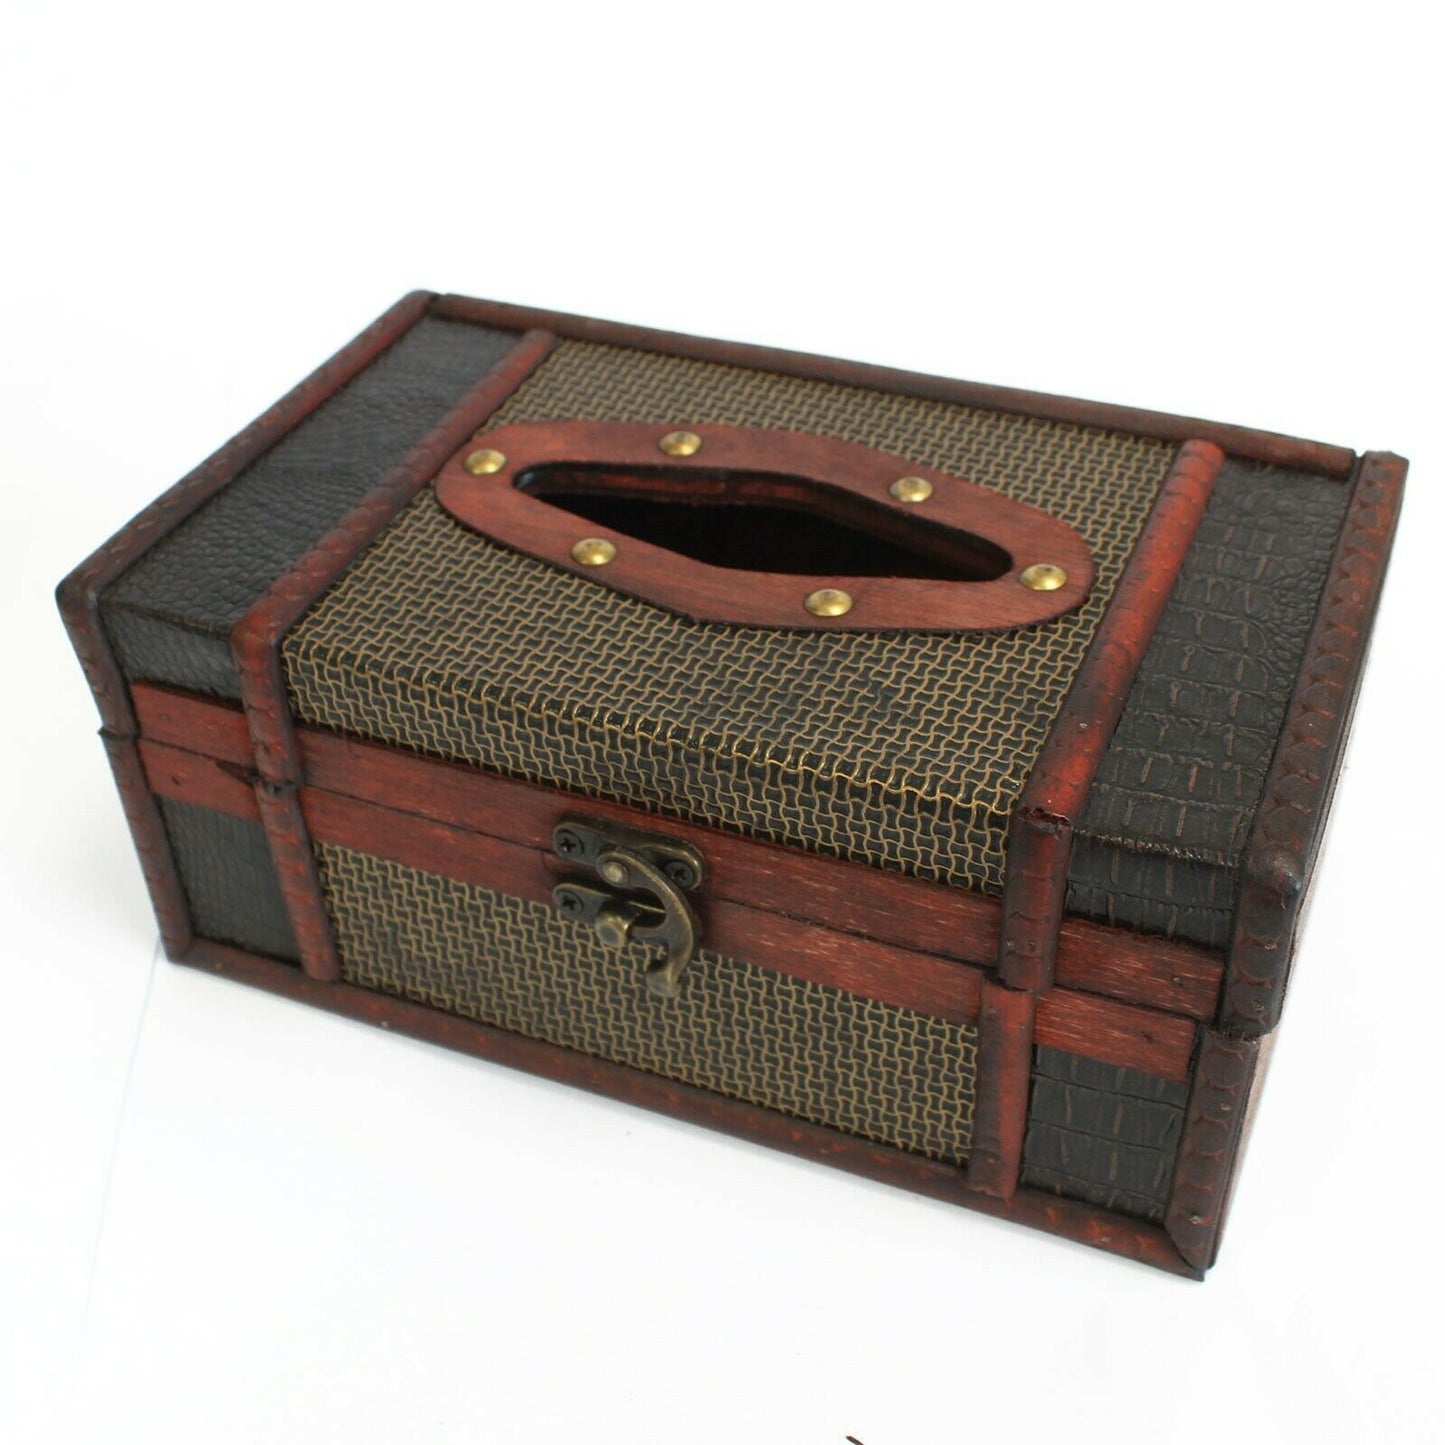 STEAMPUNK/ VINTAGE Large Tissue Box Trunk Style WOODEN HANDMADE Boxes none